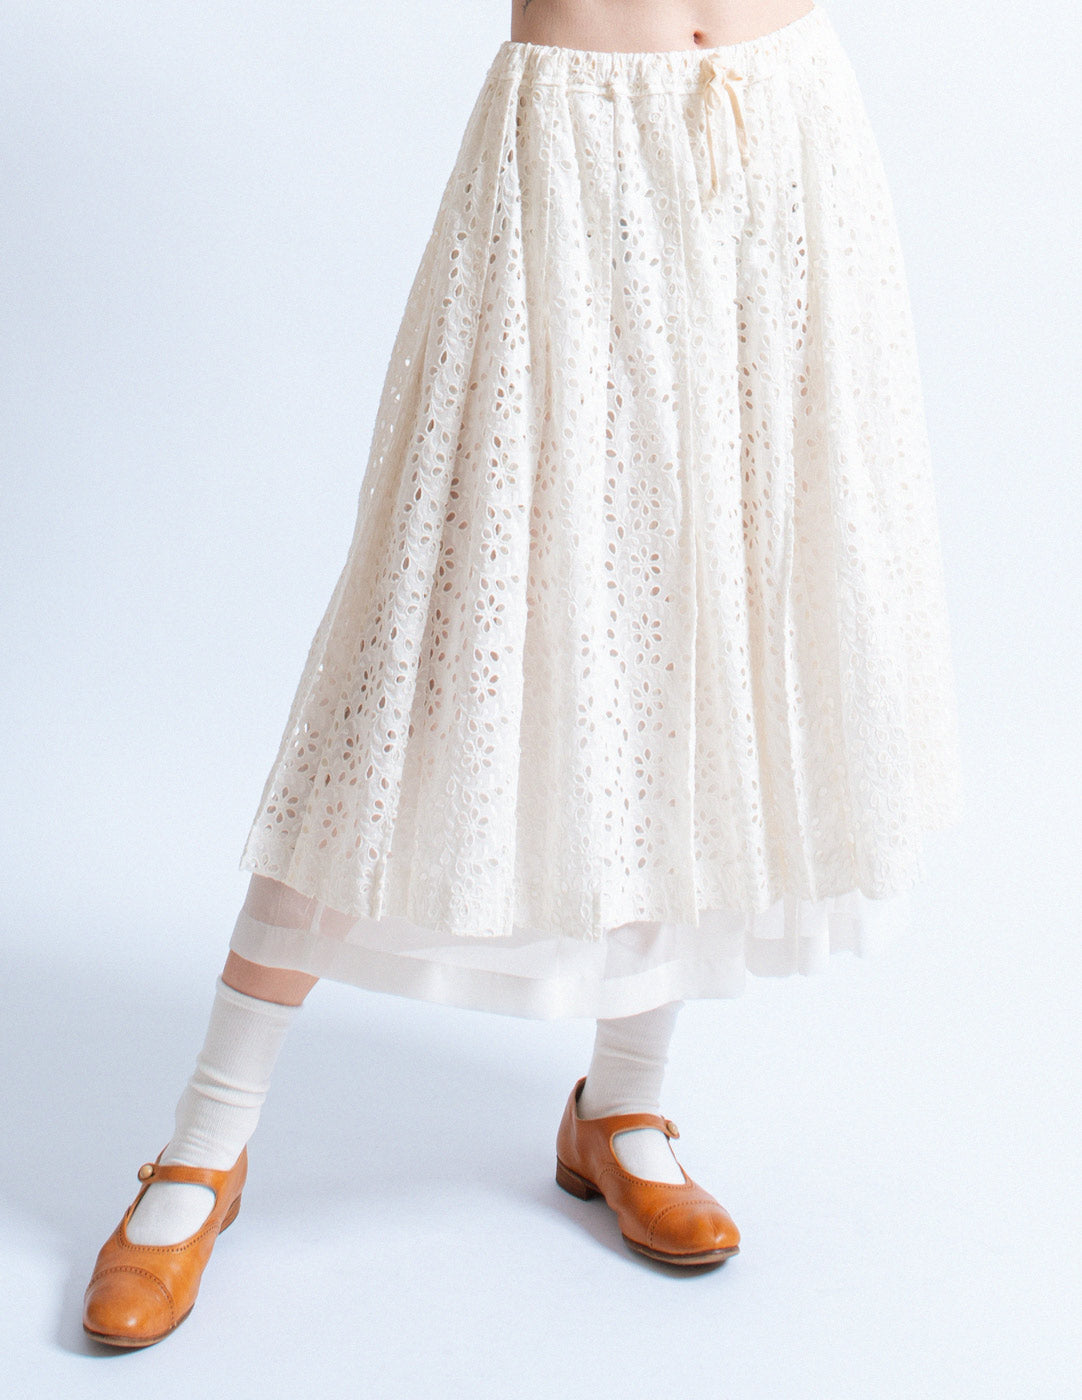 Comme des Garçons tricot white cotton eyelet layered skirt front detail